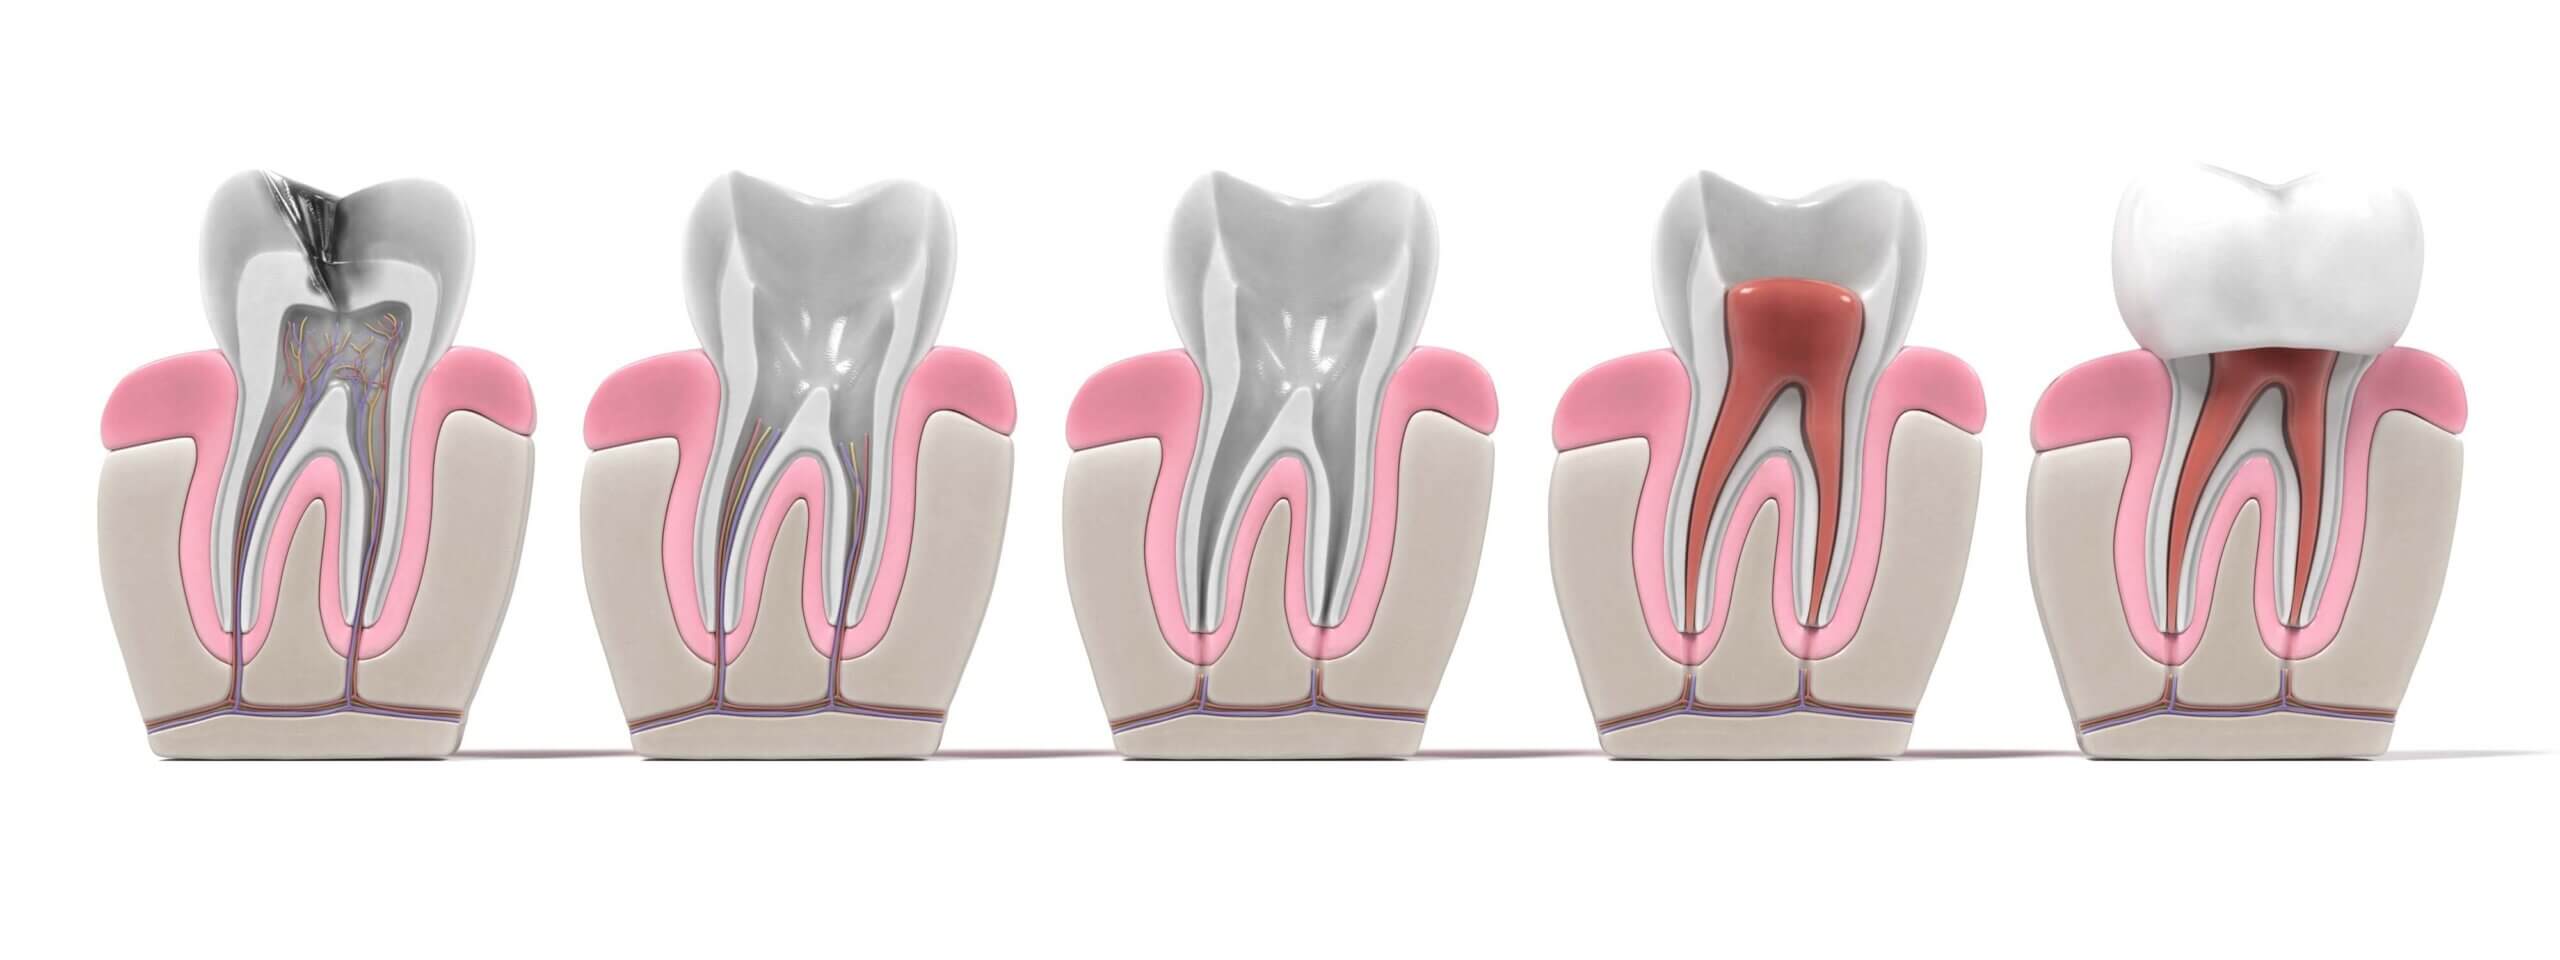 Root Canal Images for Dr. Rich Higgs in Chandler AZ